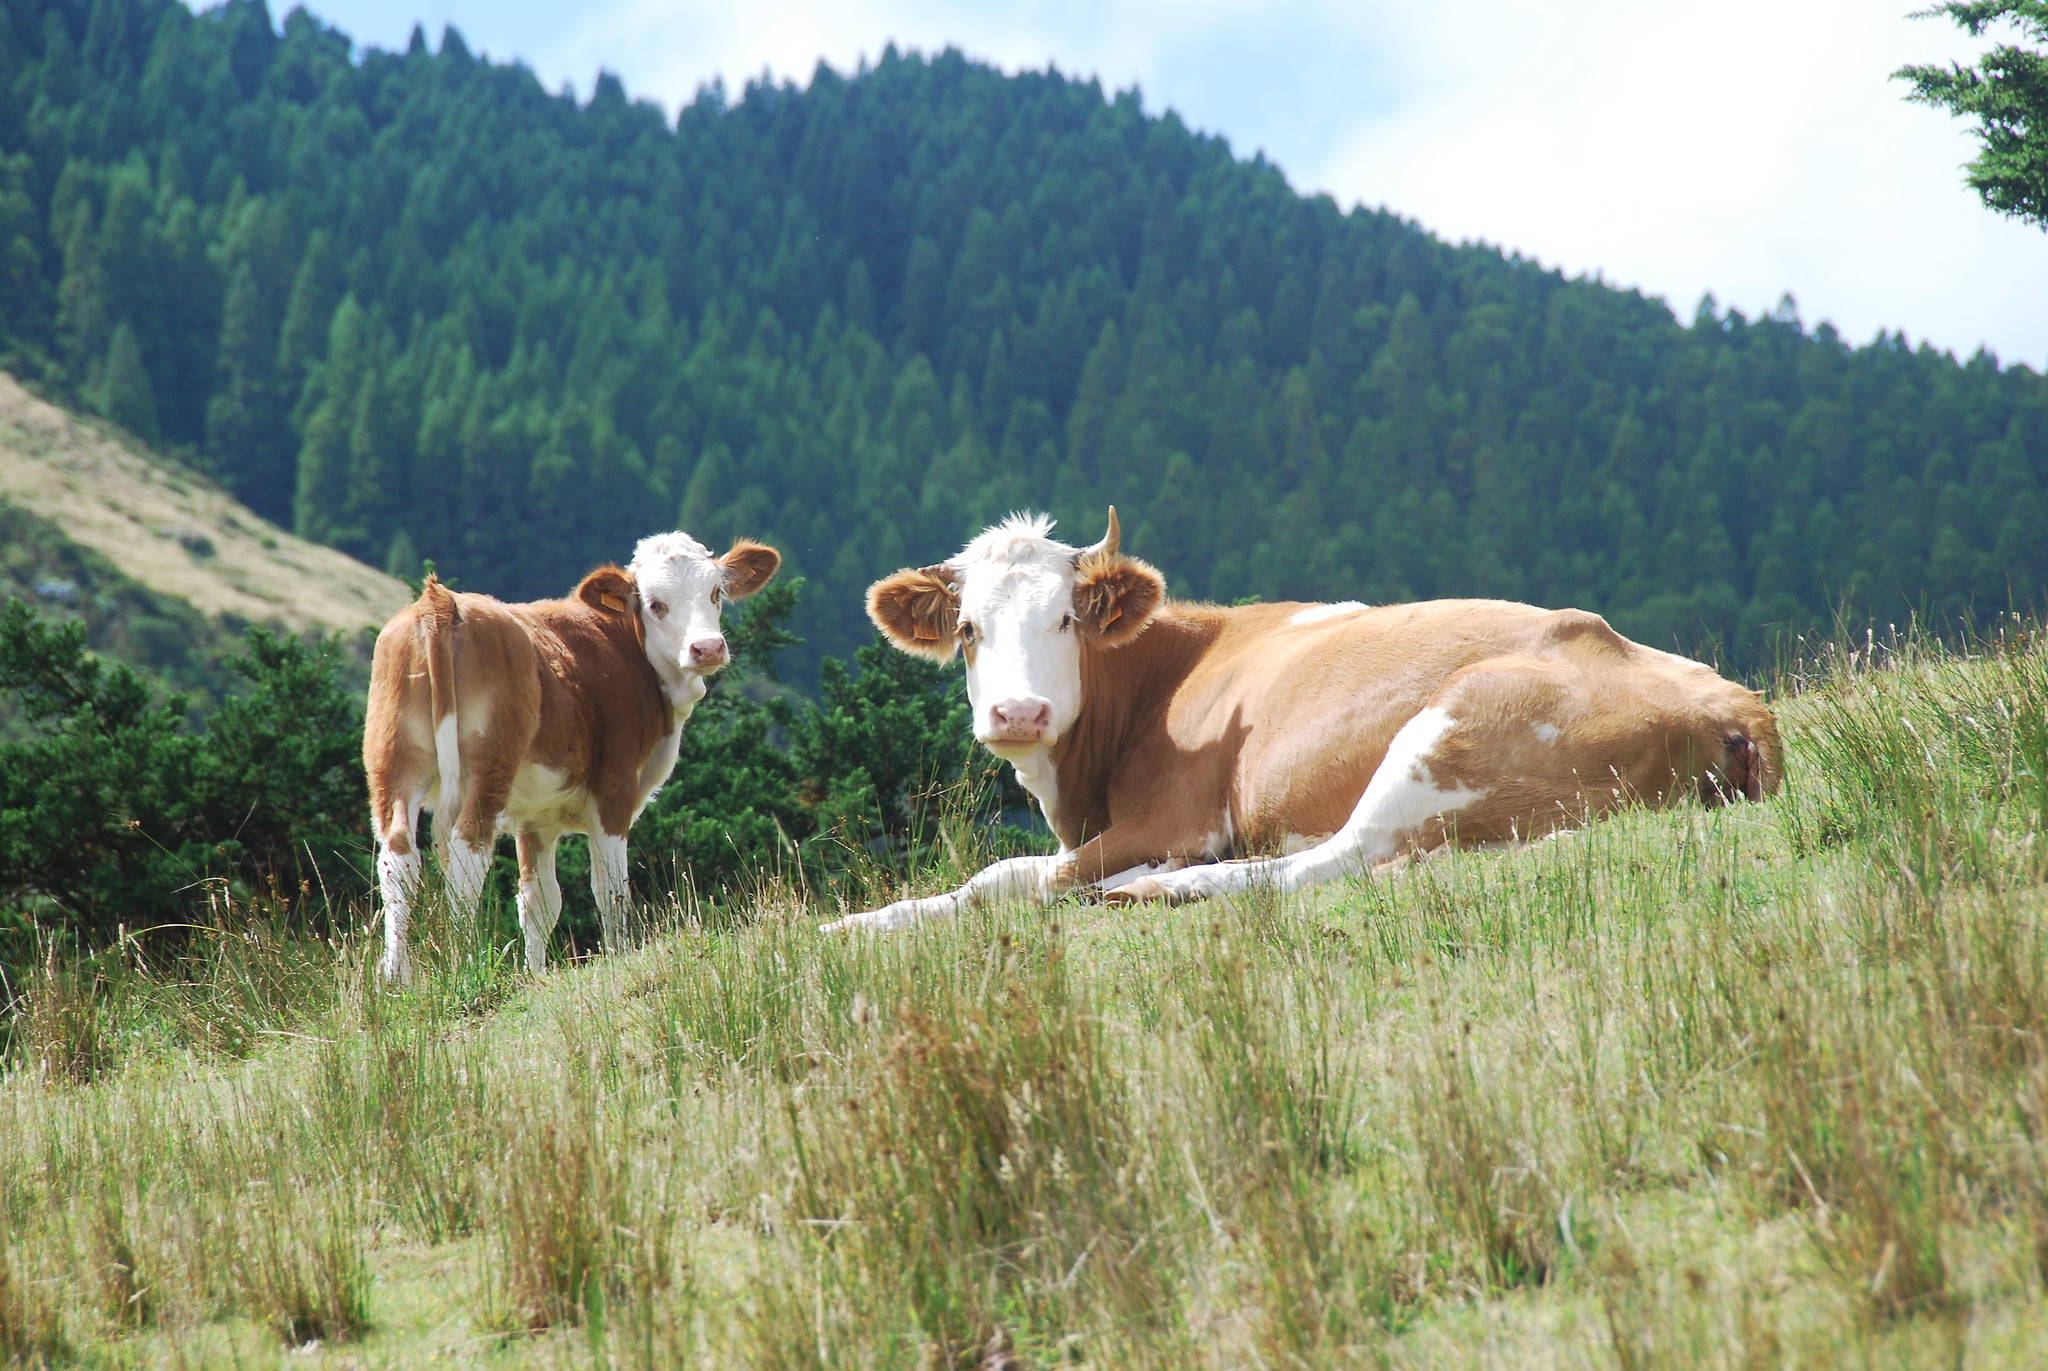 brown-and-white cattle and calf, forest, hills, cows, rural Scene